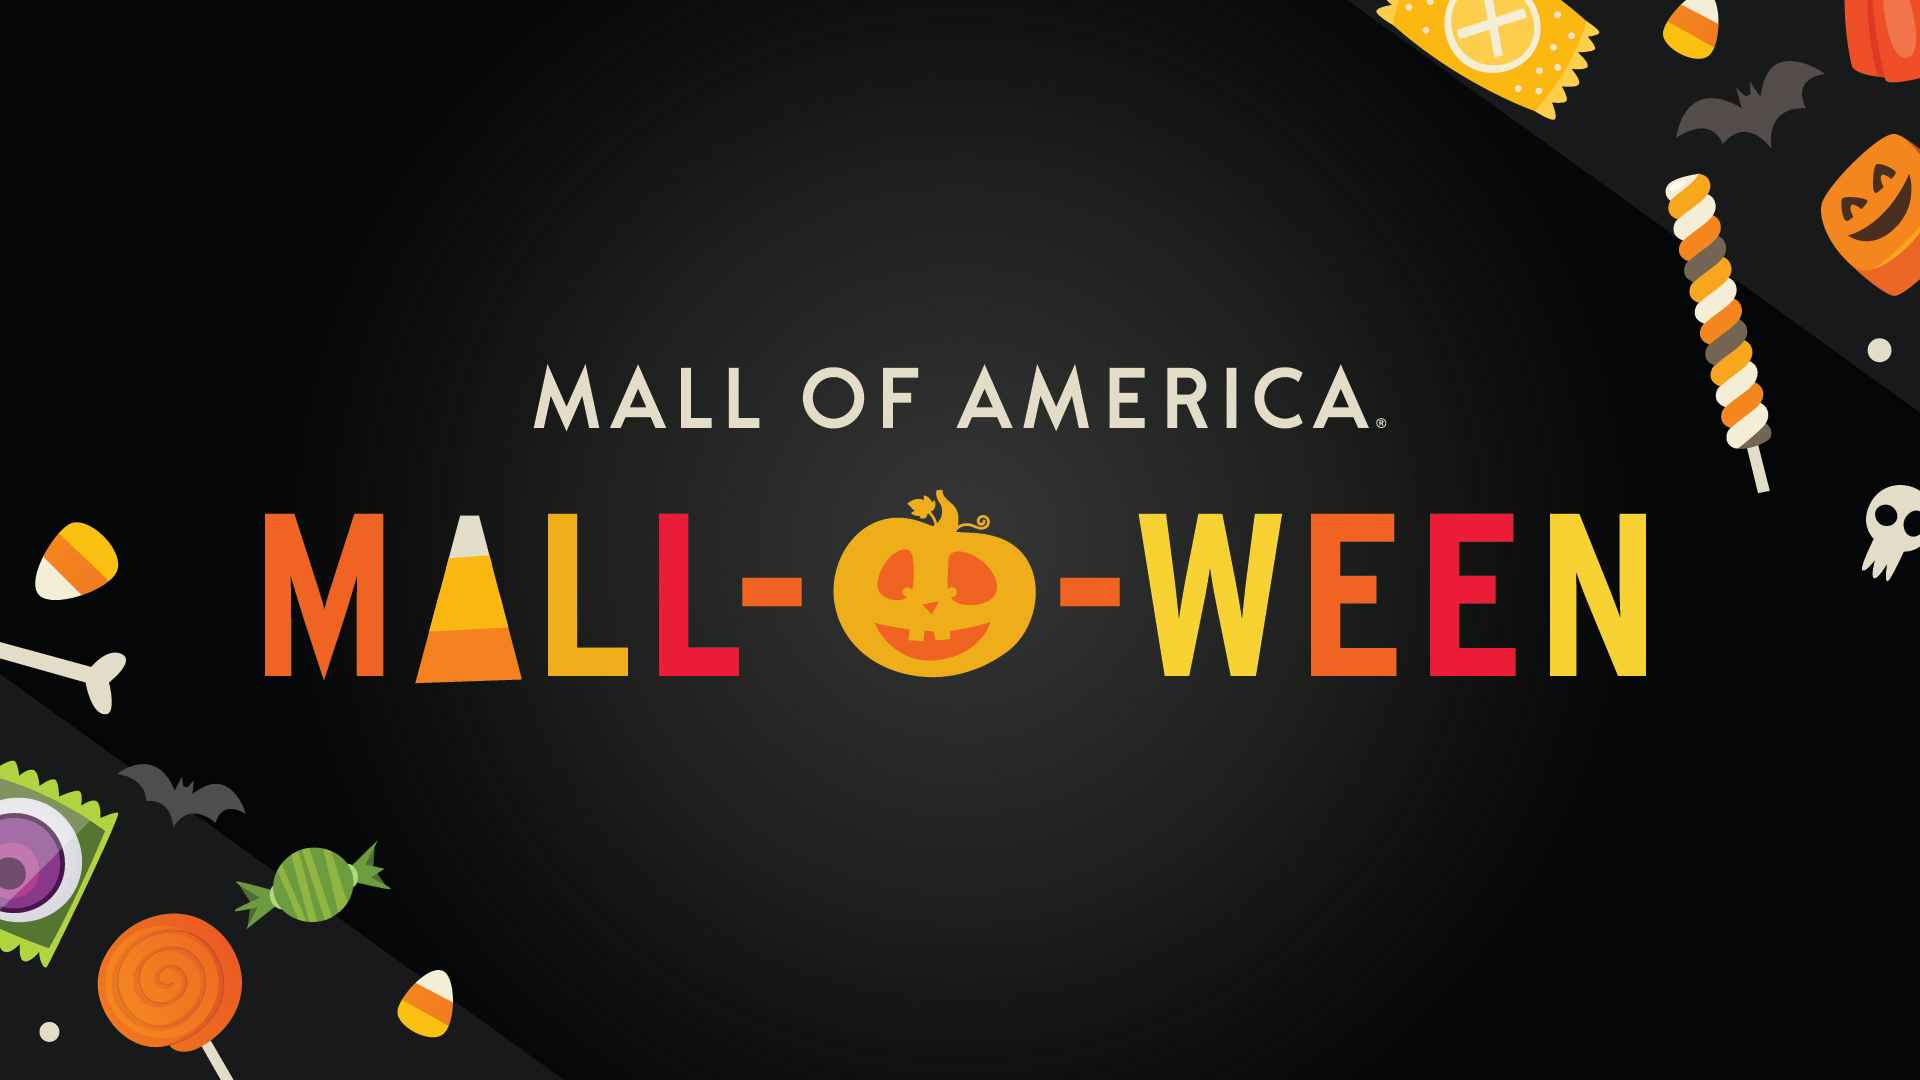 the banner for the Mall of America Mall-o-ween event